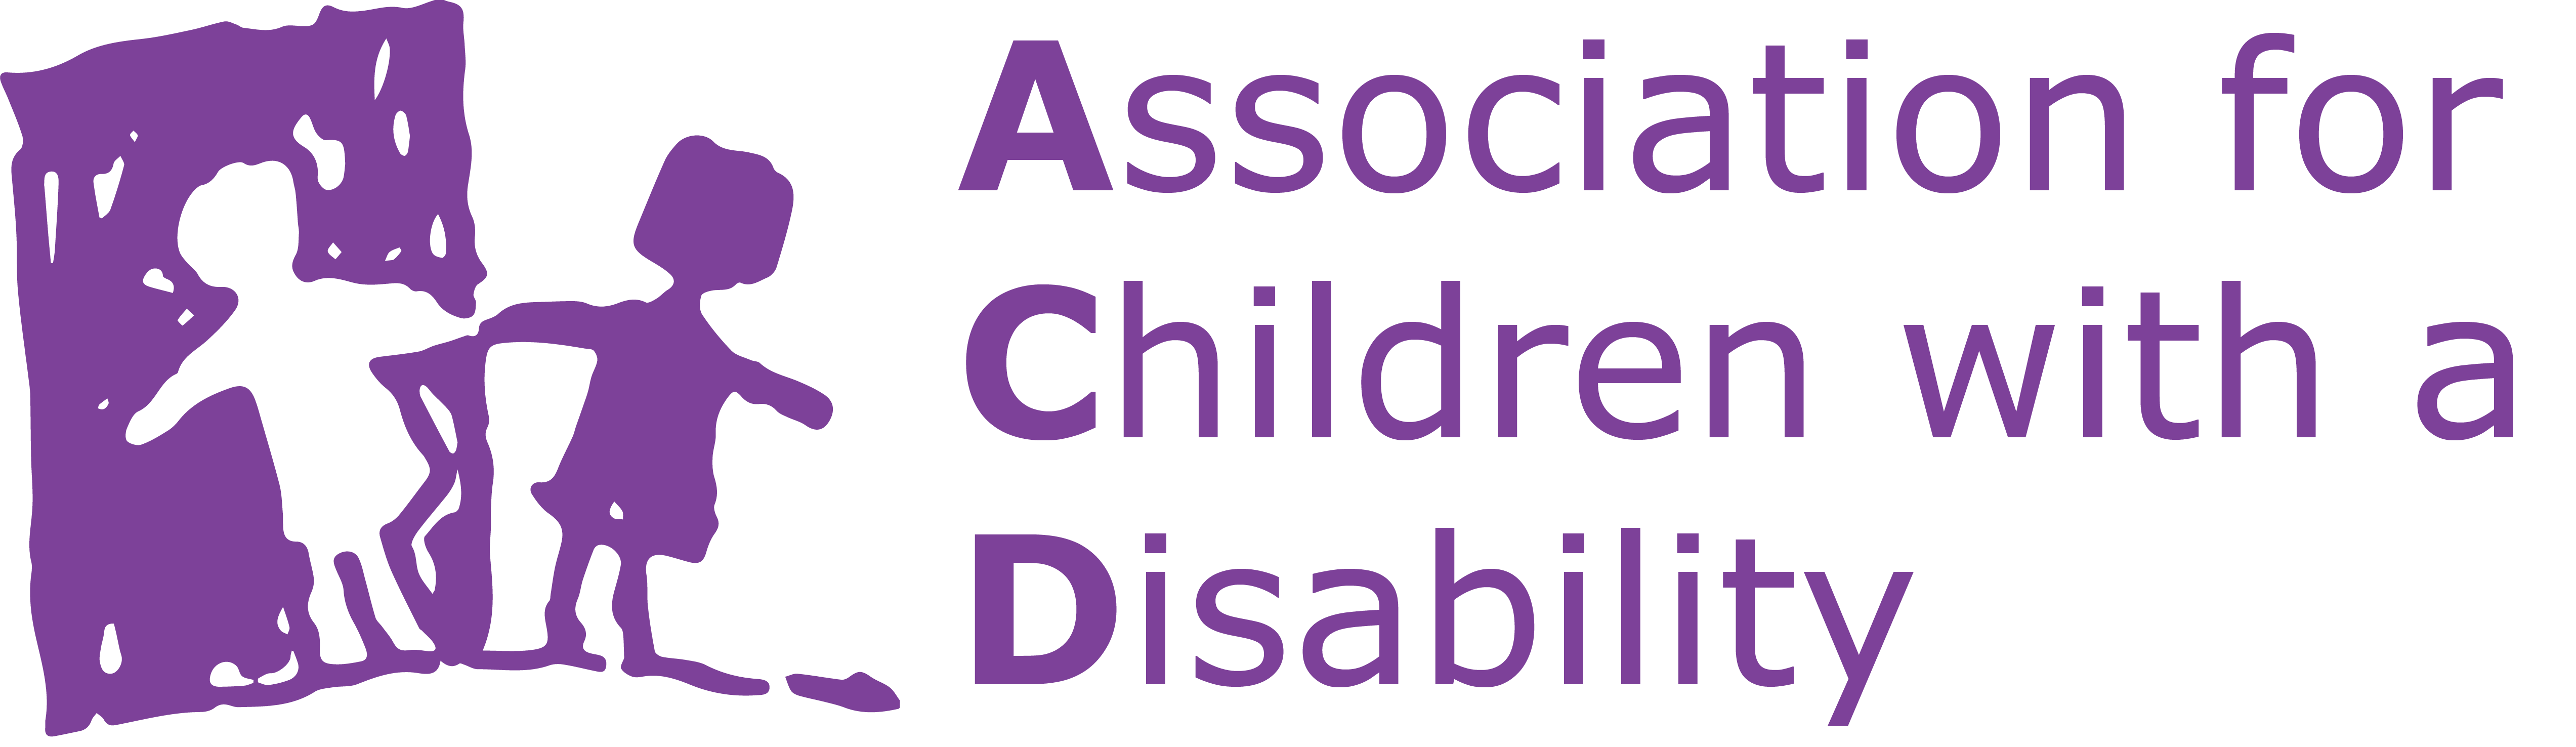 Link to Home. Association for Children with a Disability logo: An icon of two children holding hands.